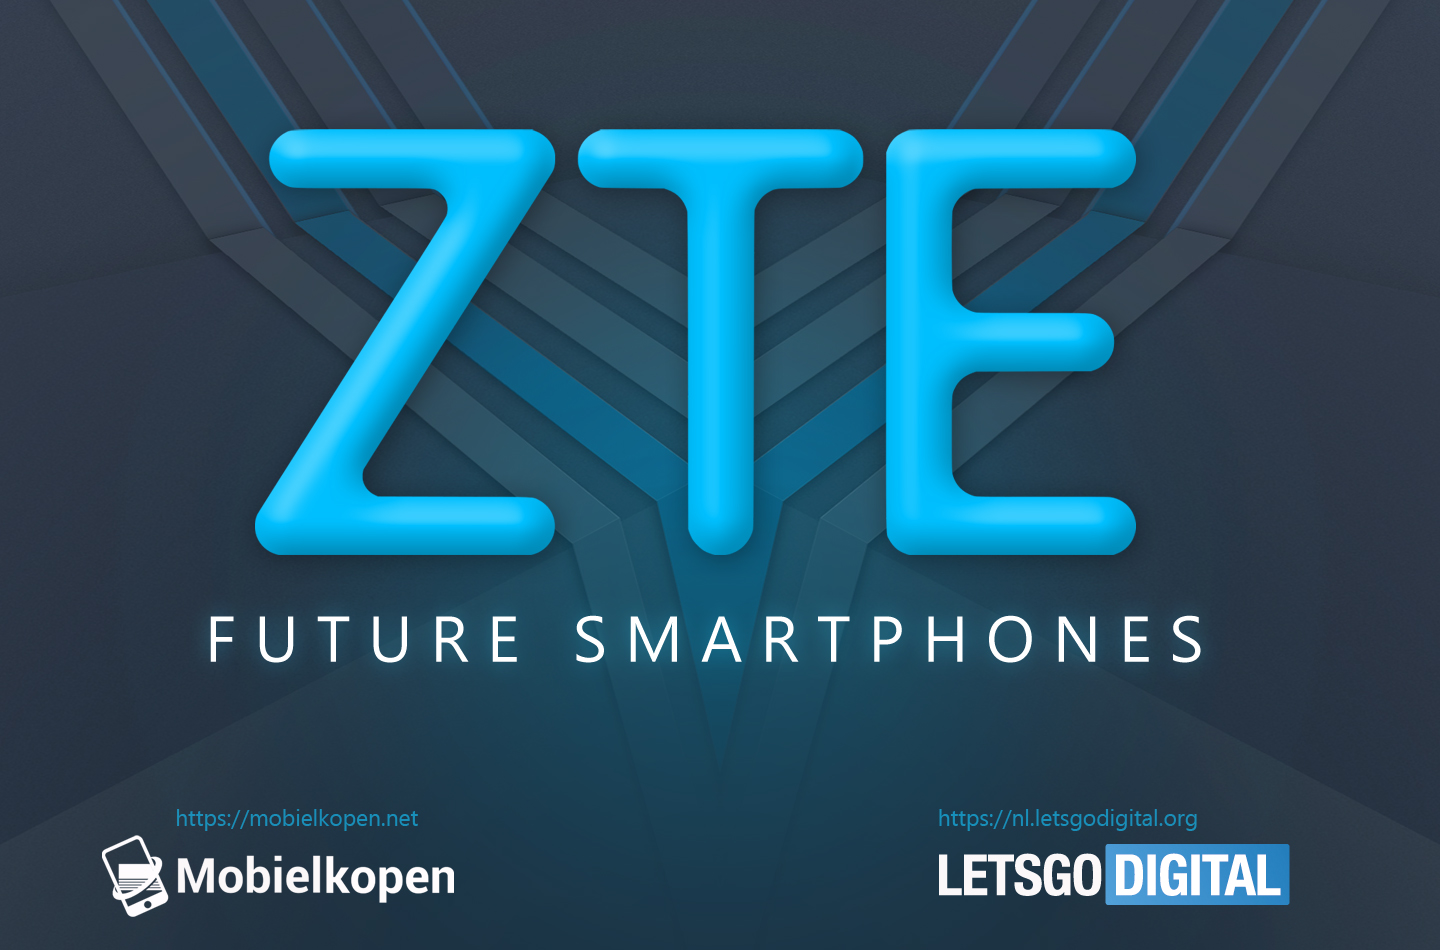 Dual-sided phone from ZTE looks similar to Galaxy Note 10